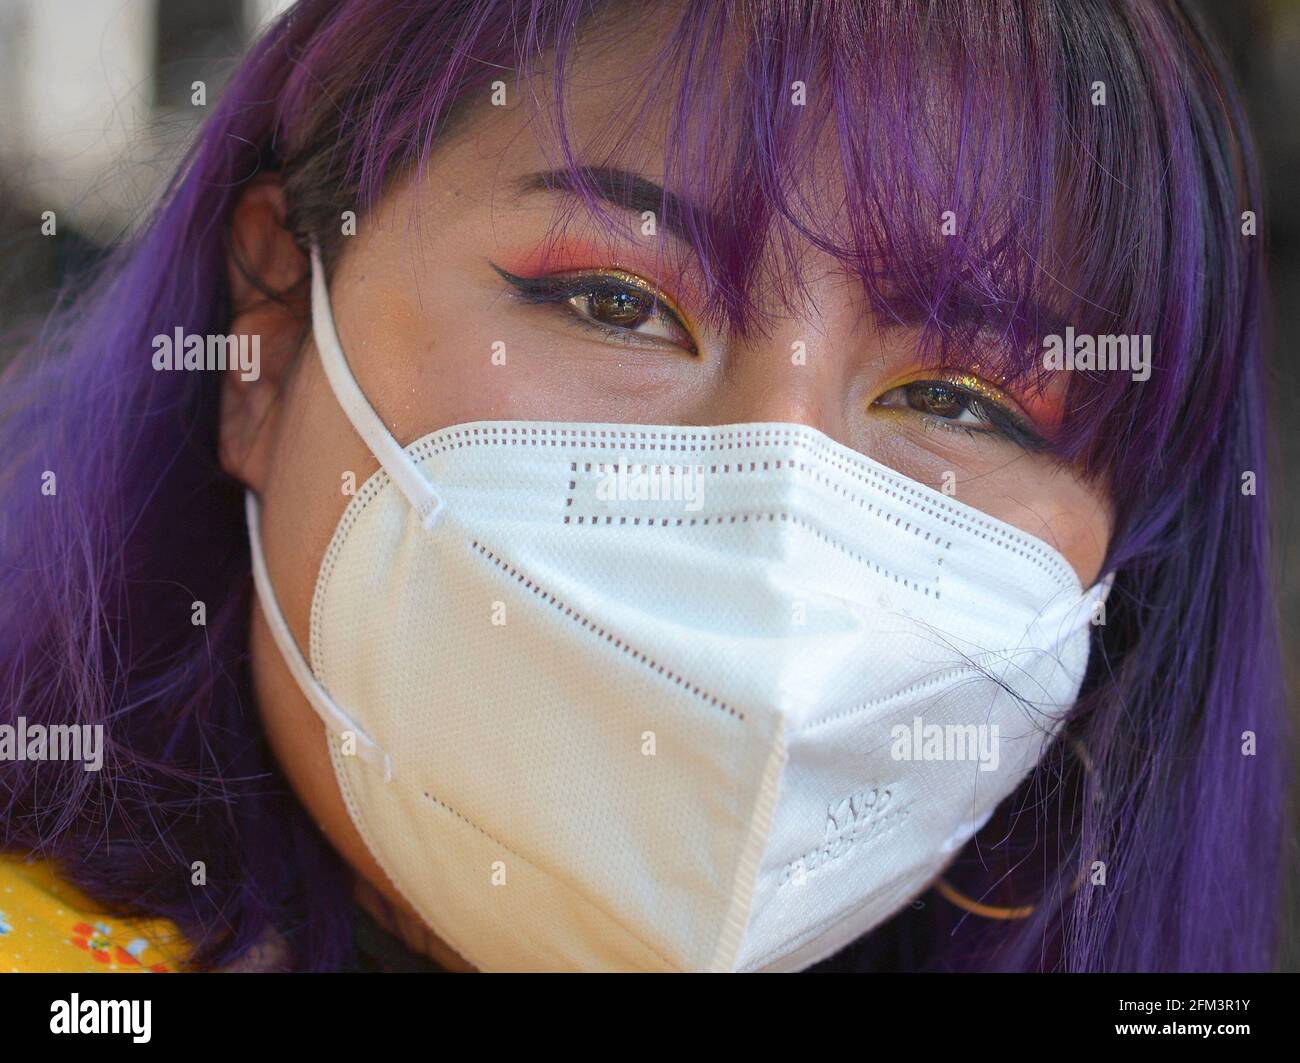 Young indigenous South American woman with elaborate beautiful eye make-up and blue dyed hair wears a KN95 face mask during the coronavirus pandemic. Stock Photo